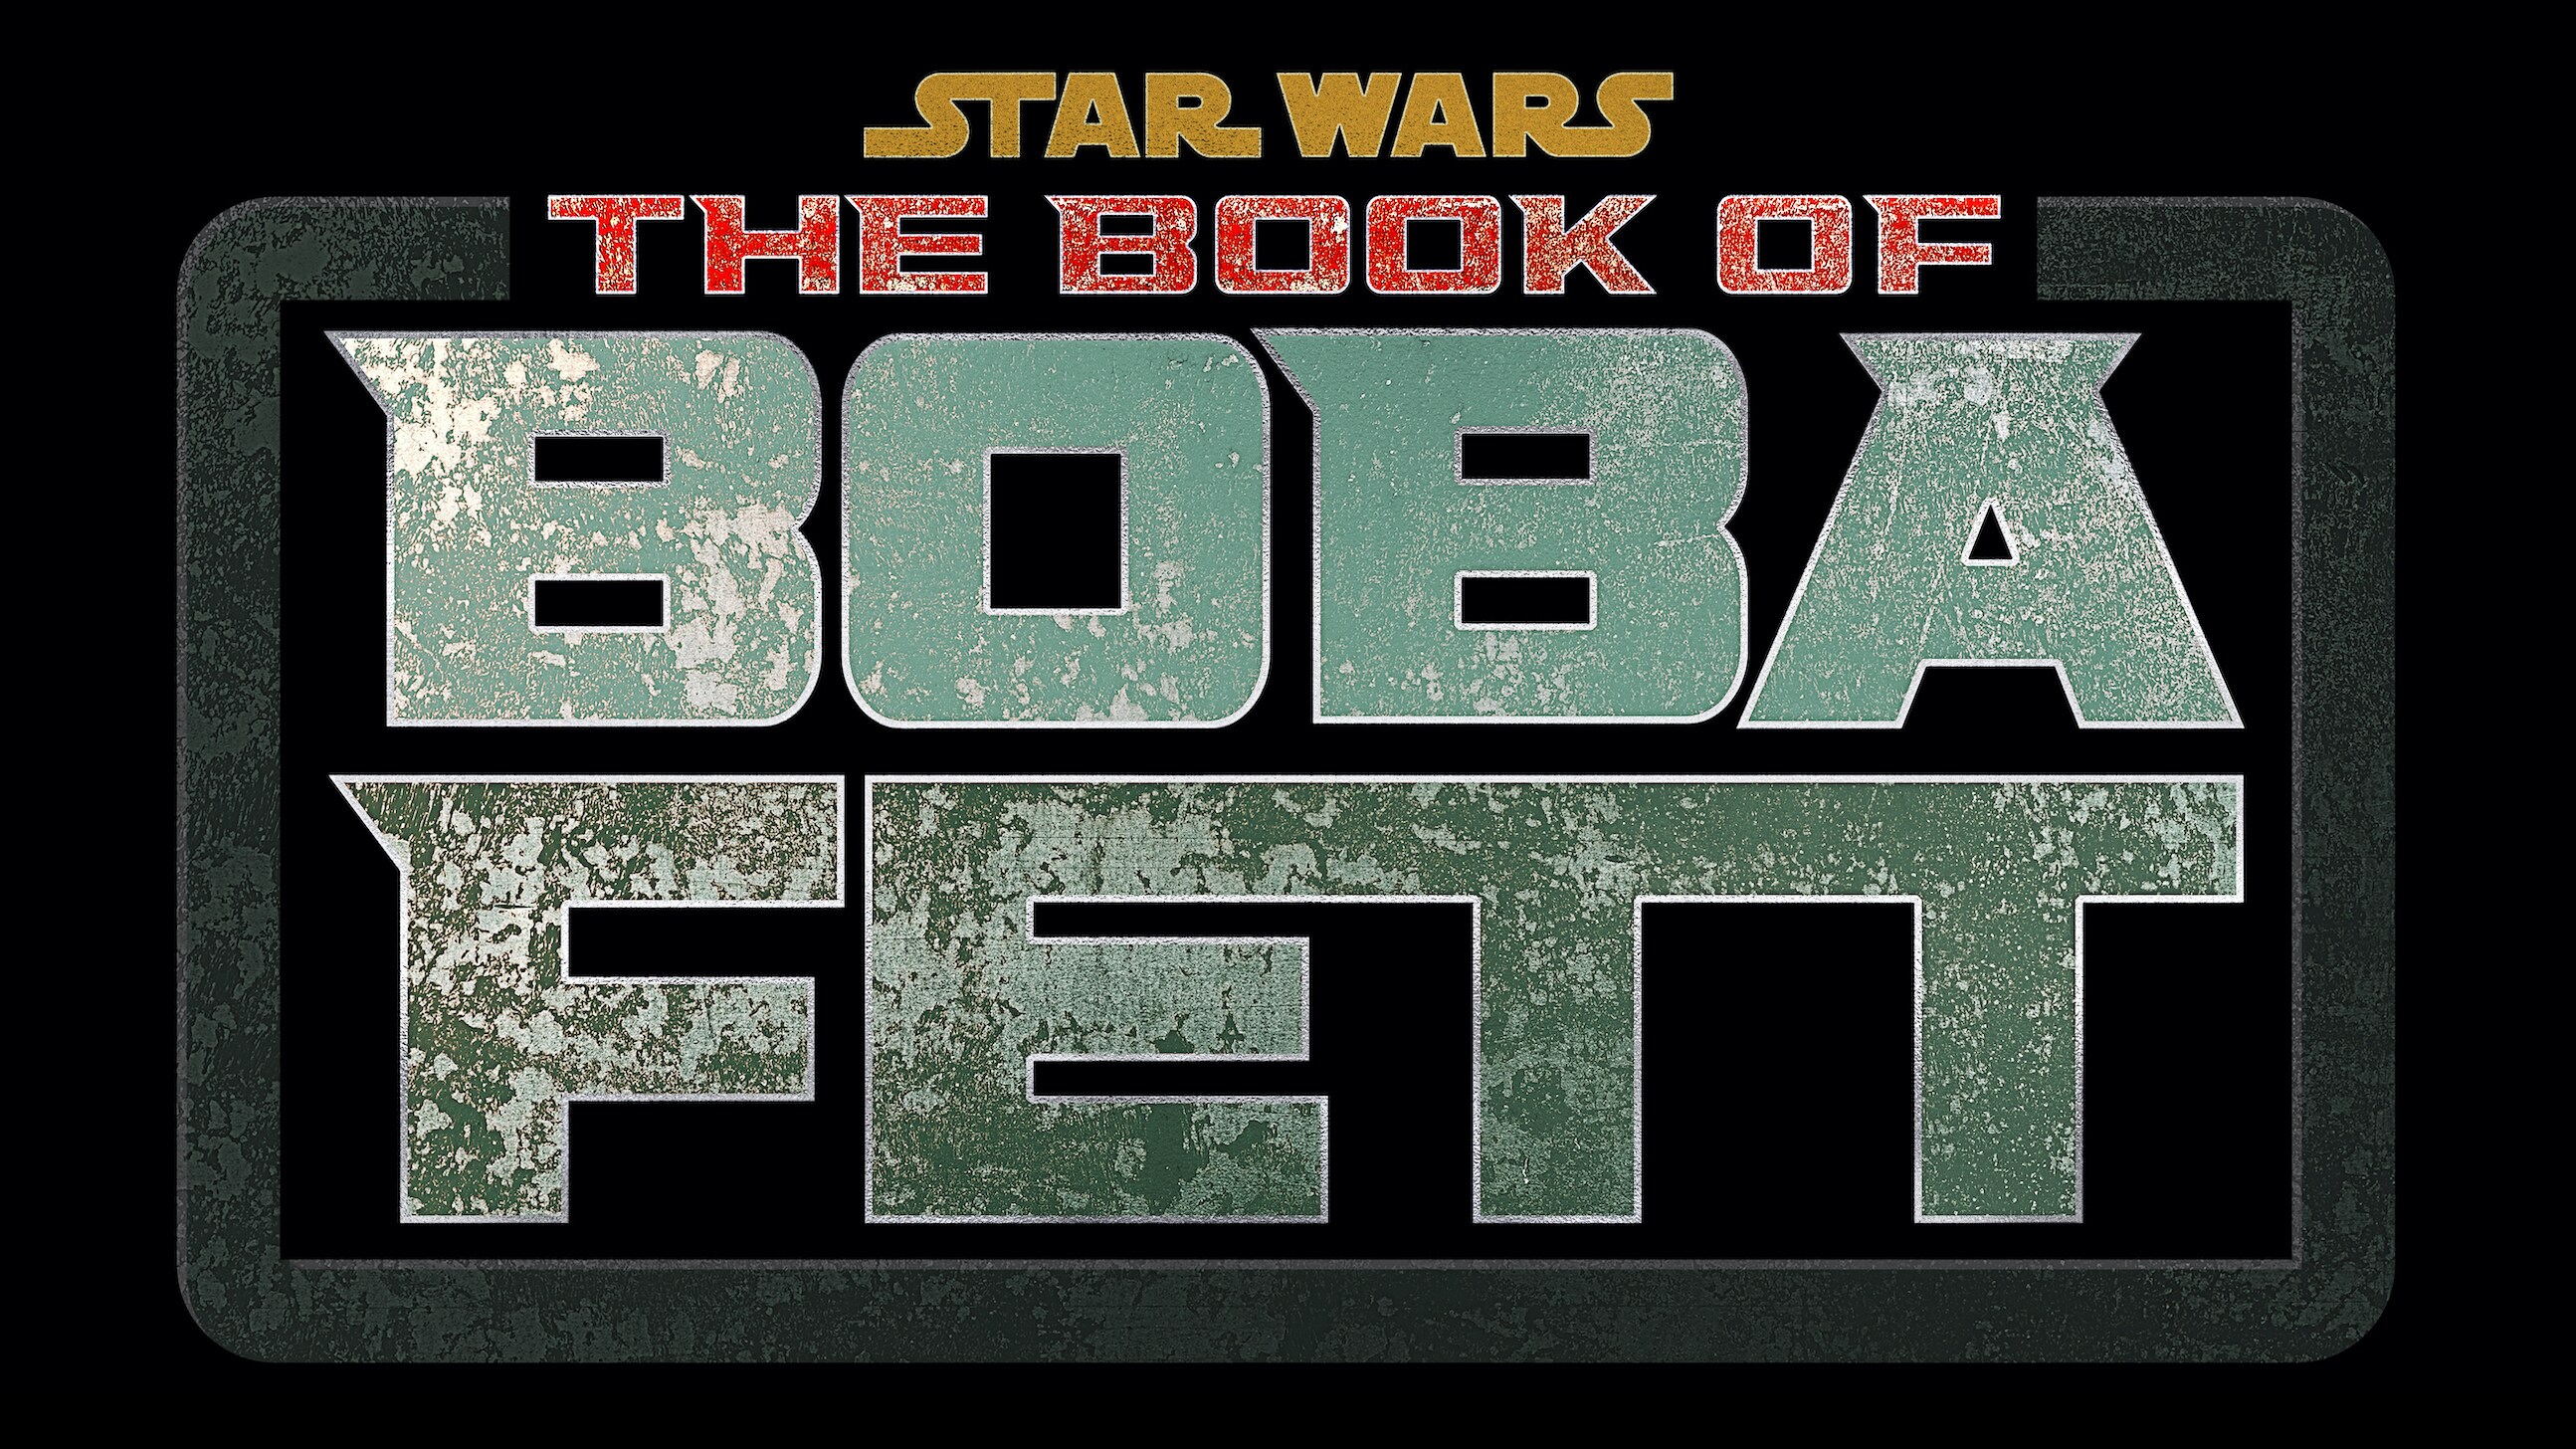 DISNEY+ DEBUTS NEW FEATURETTE FOR “THE BOOK OF BOBA FETT”